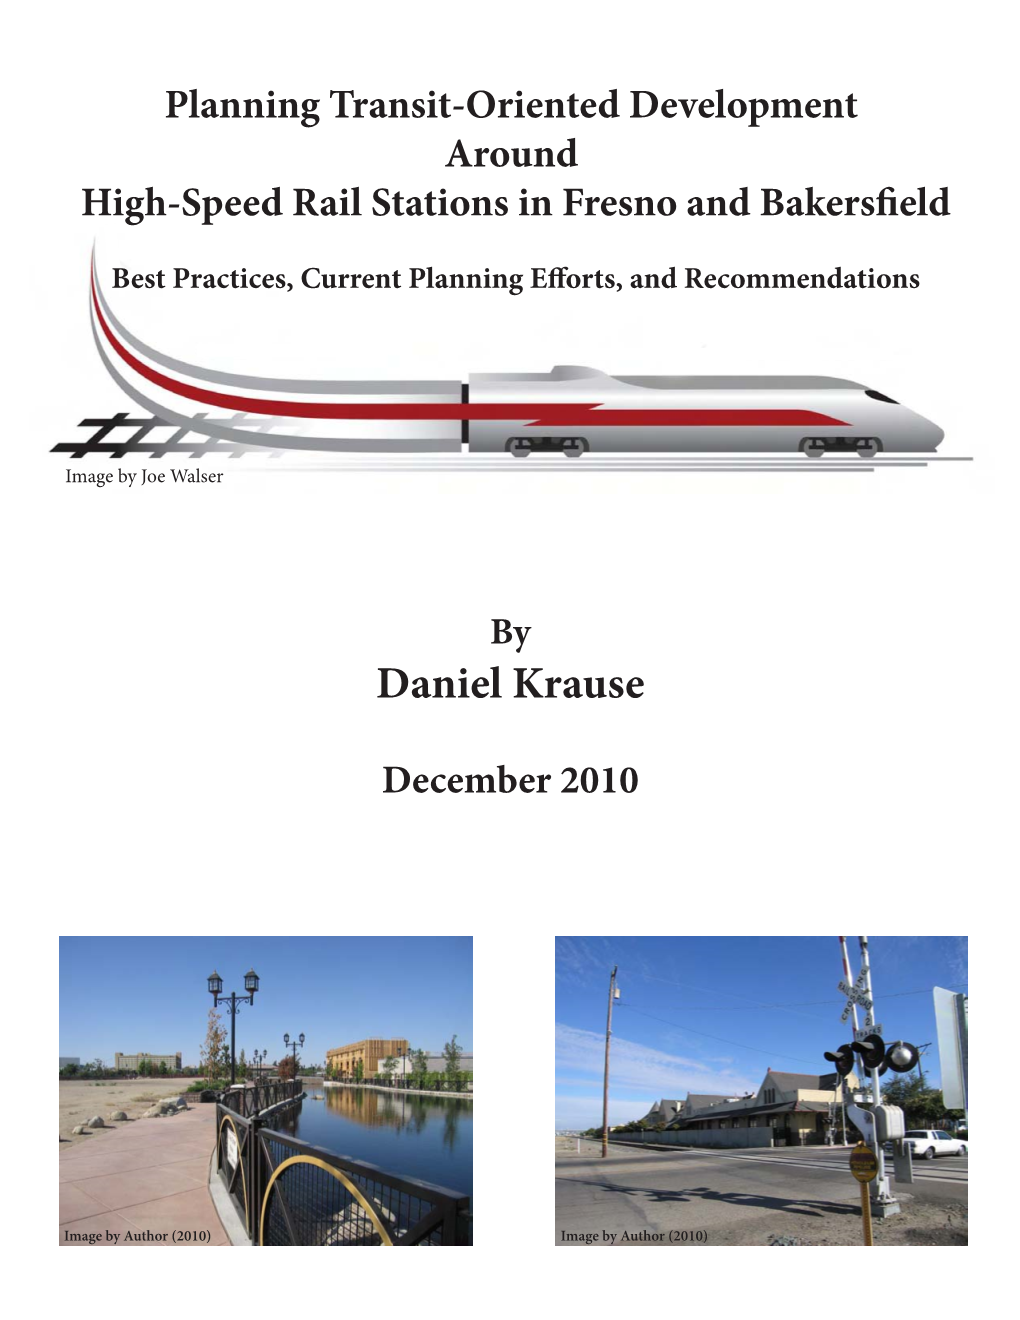 Planning Transit-Oriented Development Around High-Speed Rail Stations in Fresno and Bakersfield Best Practices, Current Planning Efforts, and Recommendations